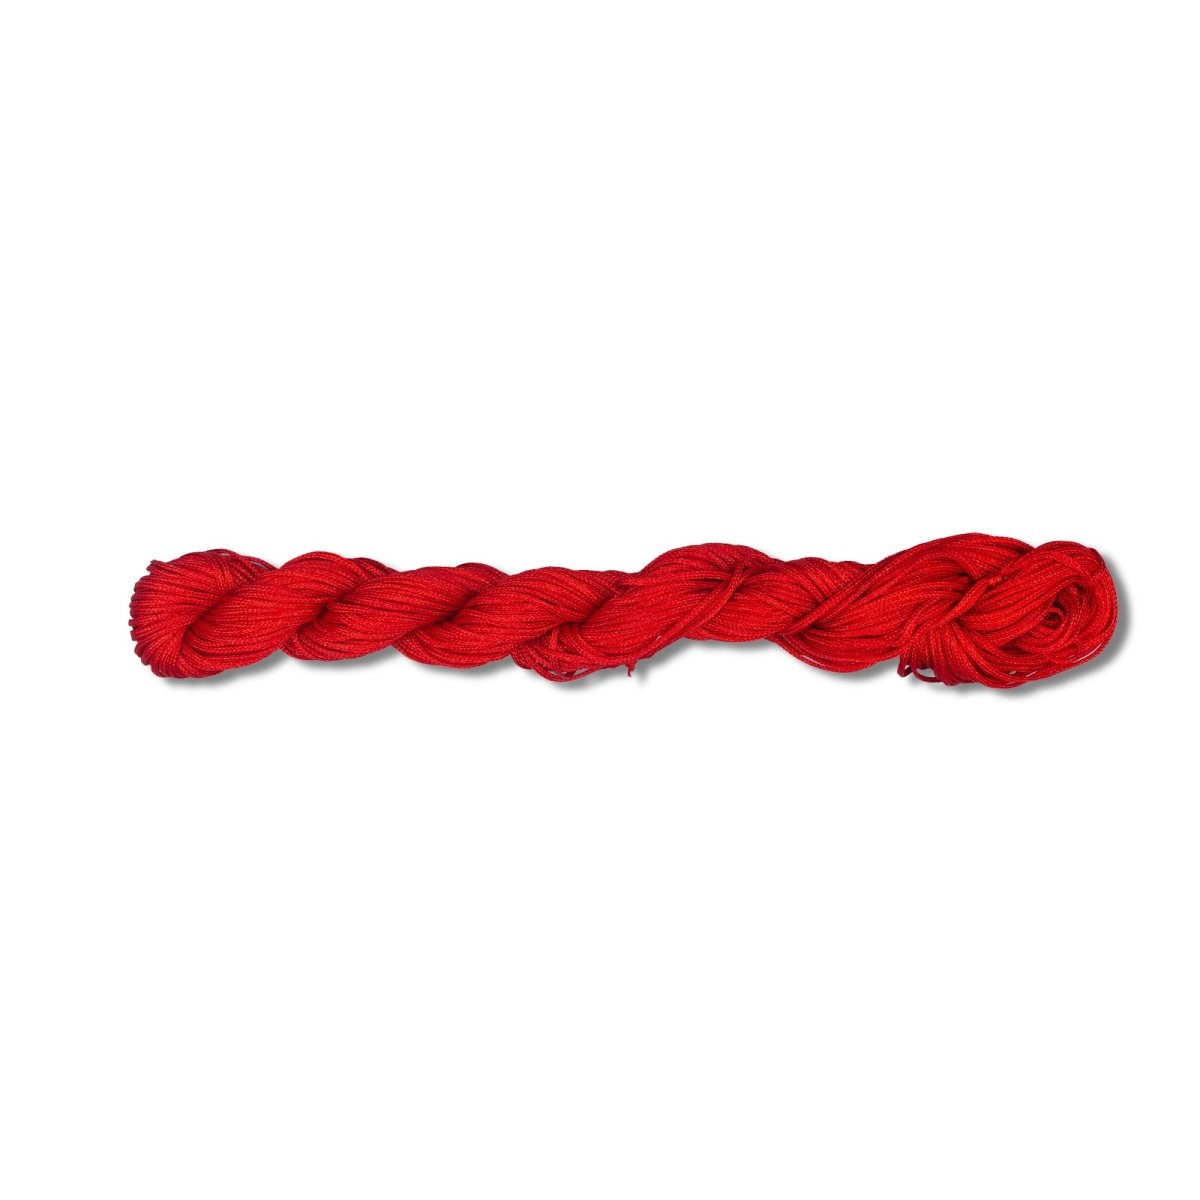 1.5mm Chinese Knotting Cord Nylon Cord Knot Thread for Necklace Bracelet Anklet Cord Beads String for Jewelry Making Supply 10 meter - DLUXCA